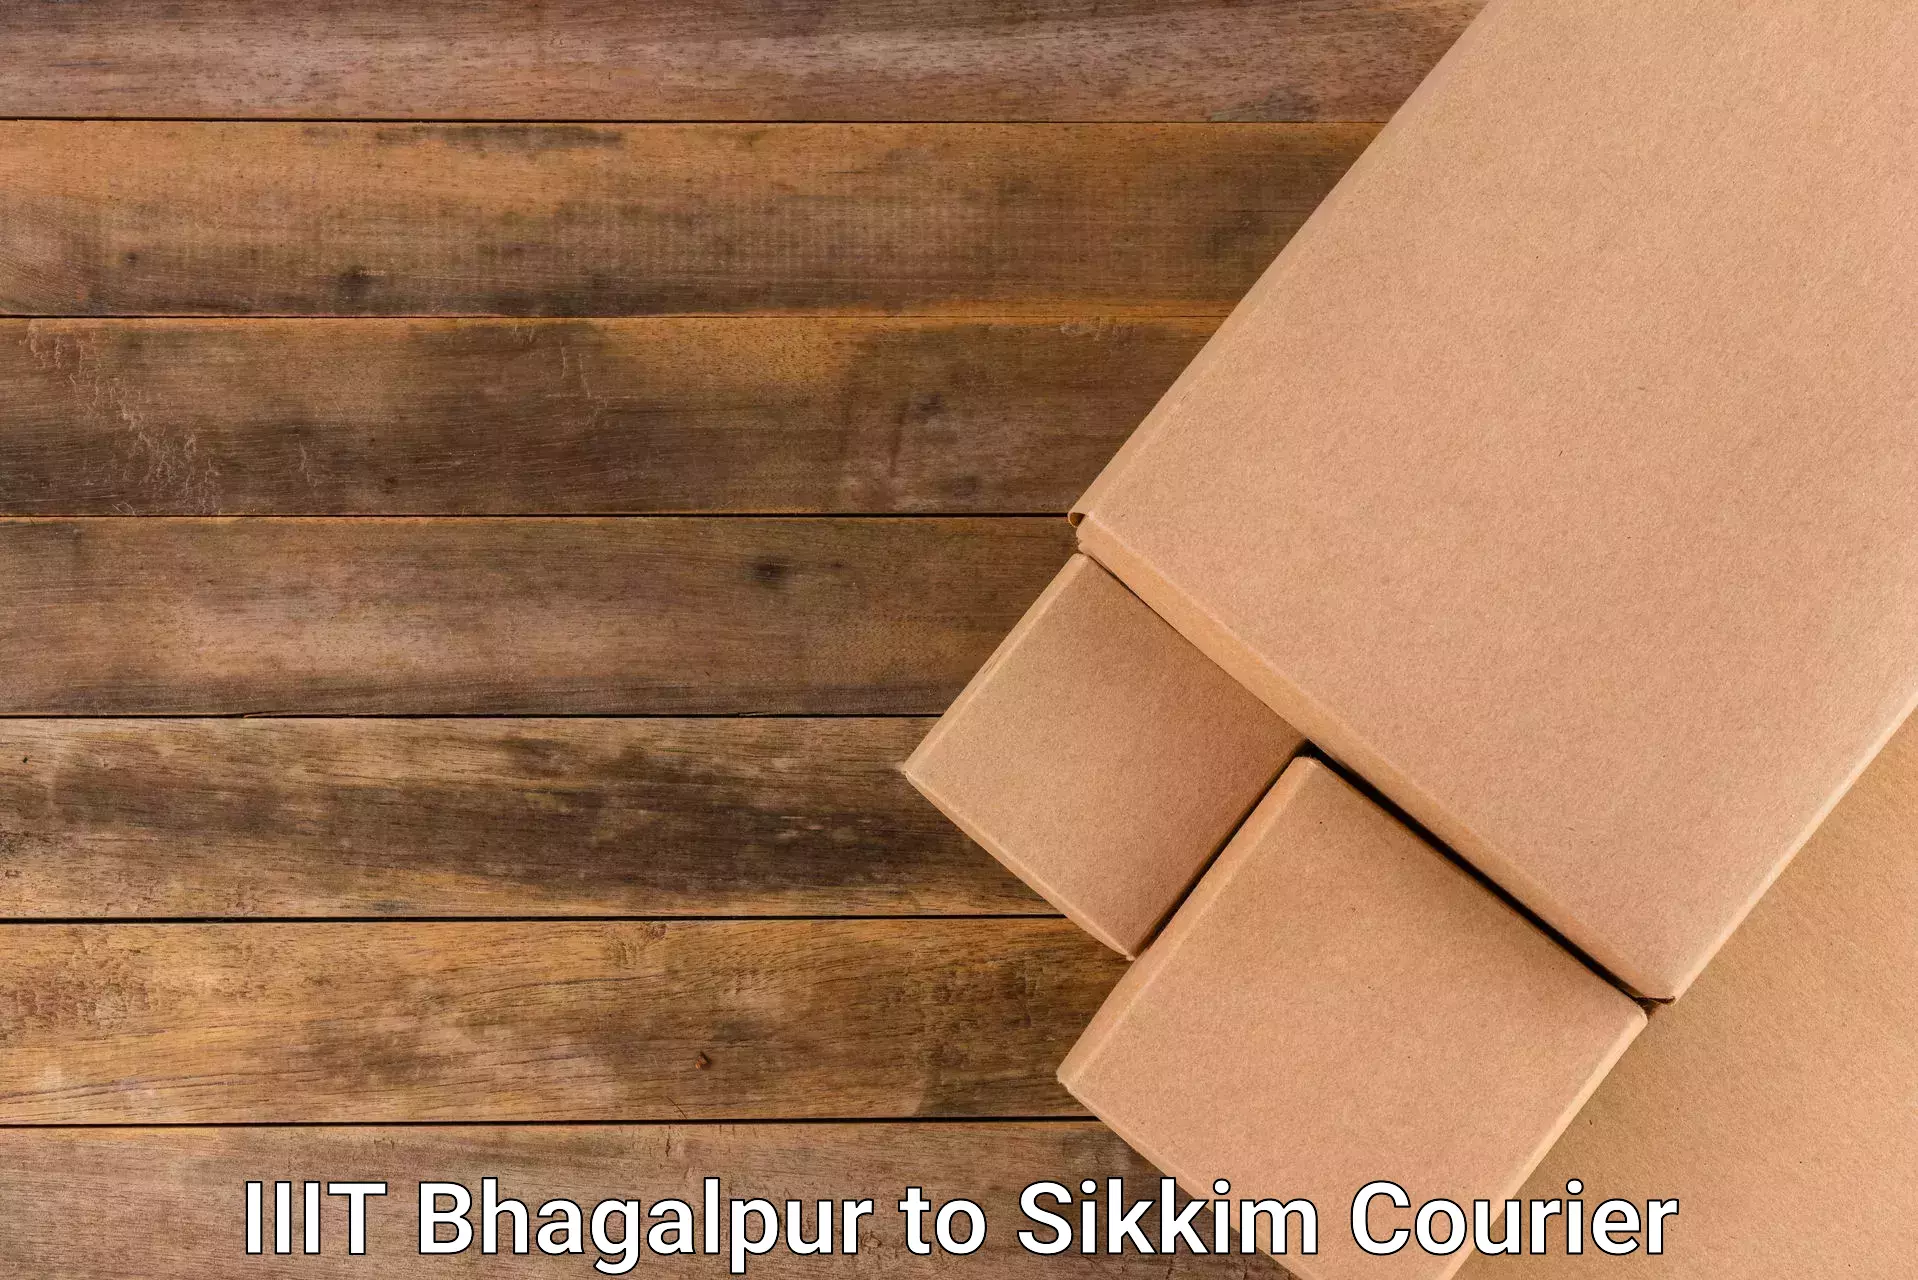 State-of-the-art courier technology IIIT Bhagalpur to Sikkim